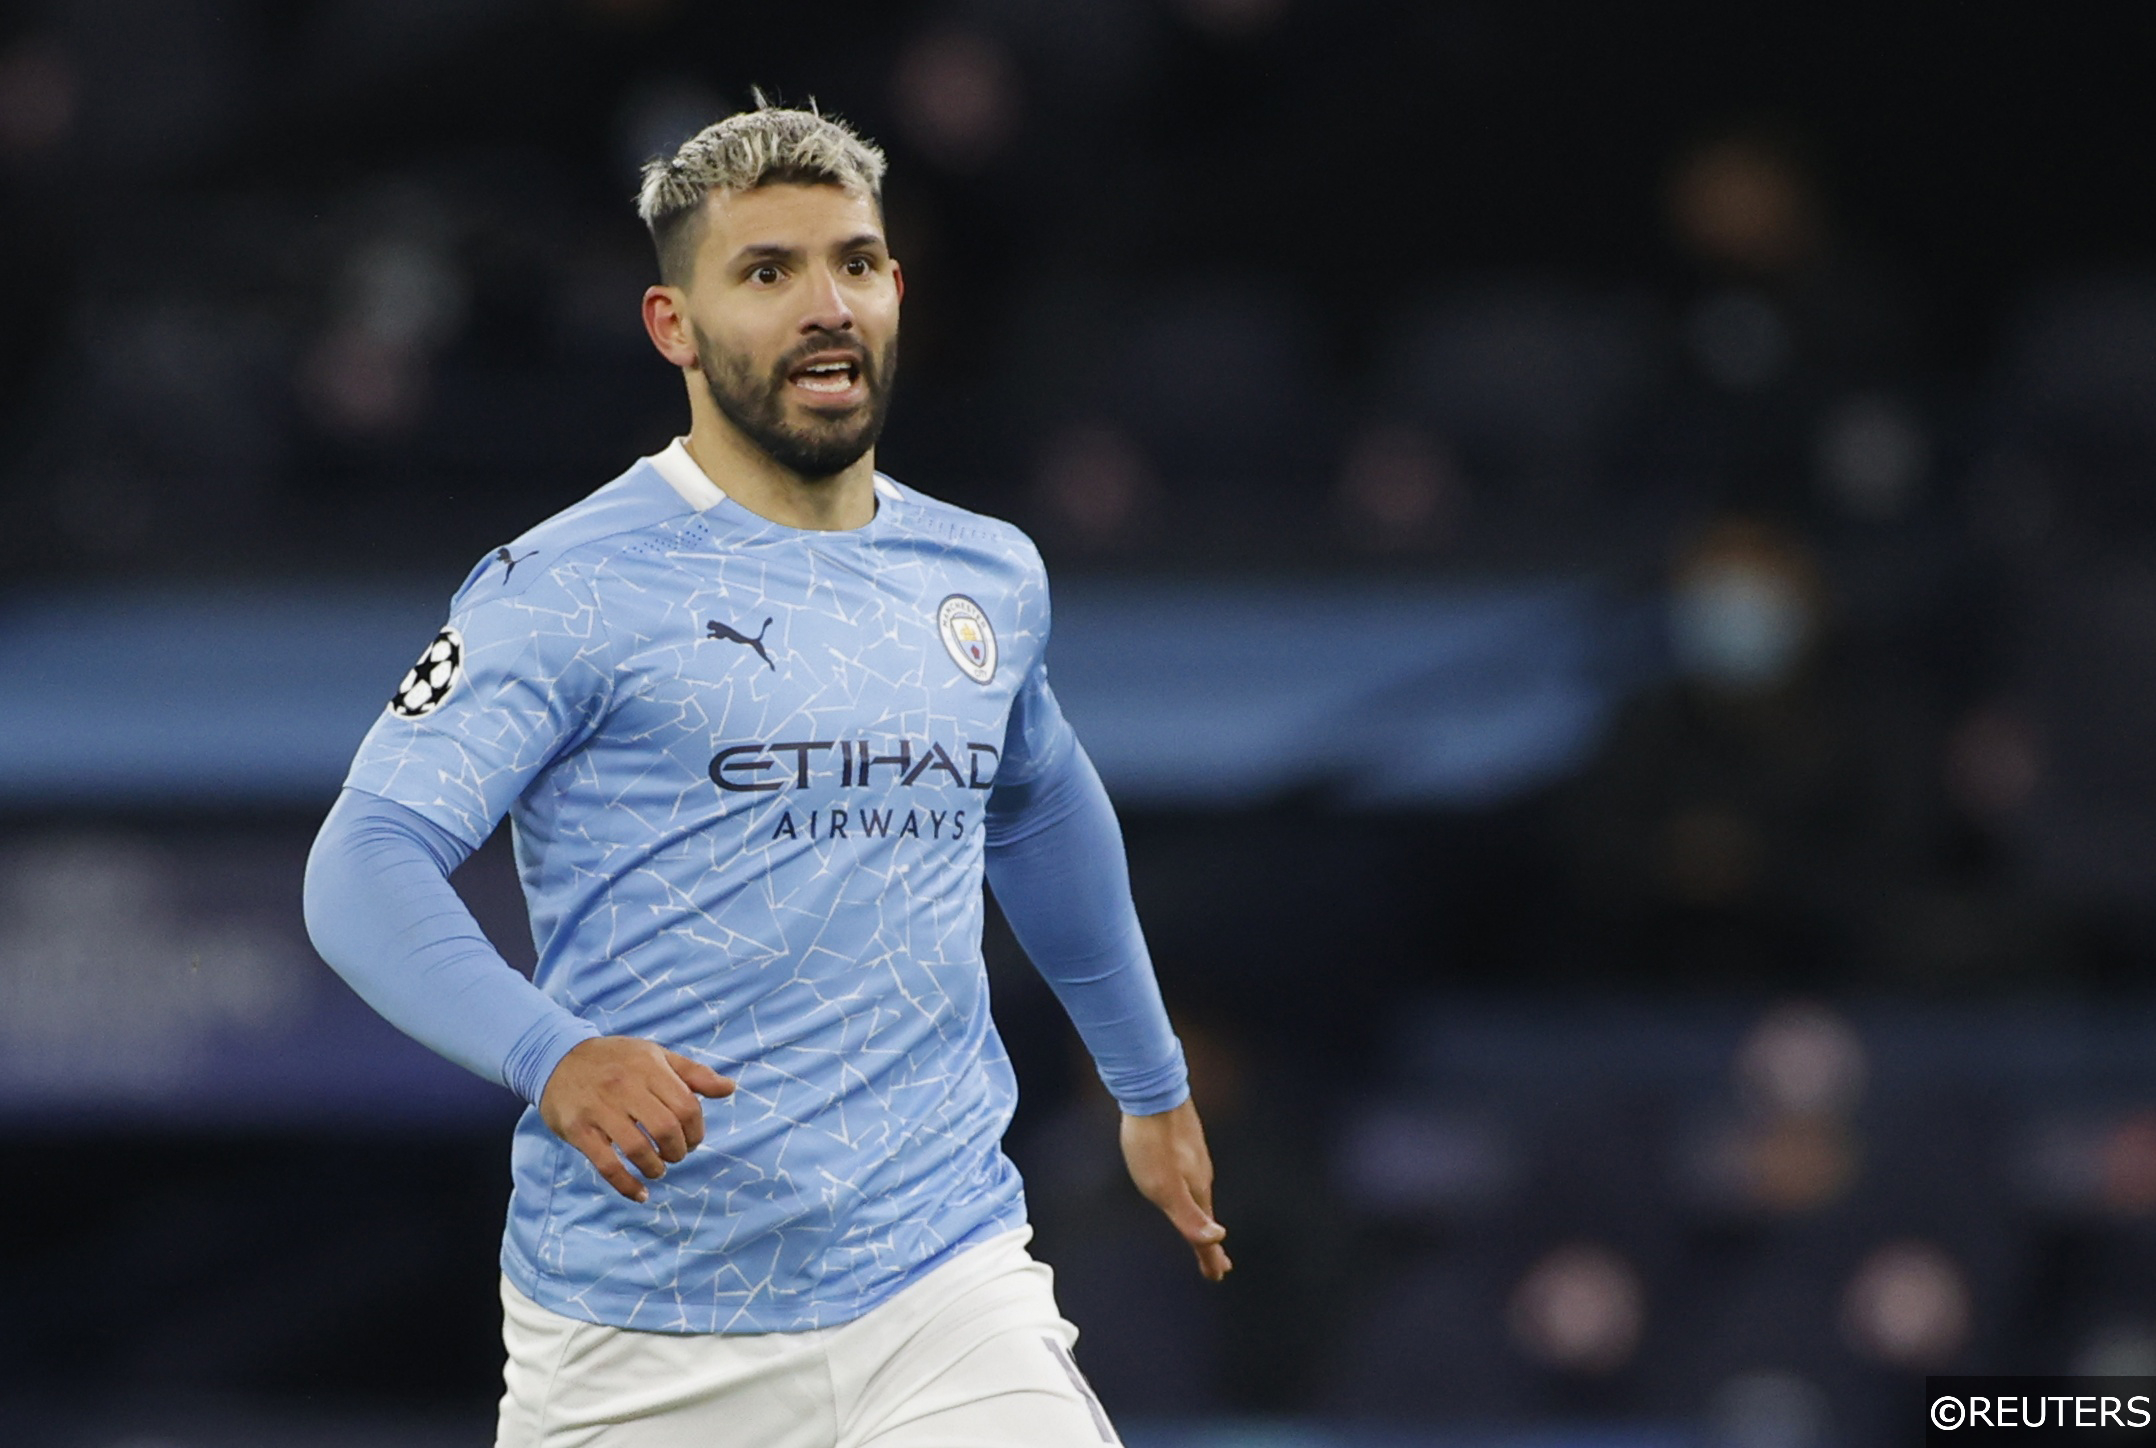 COMPLIANT - Sergio Aguero in action for Man City in the Champions League